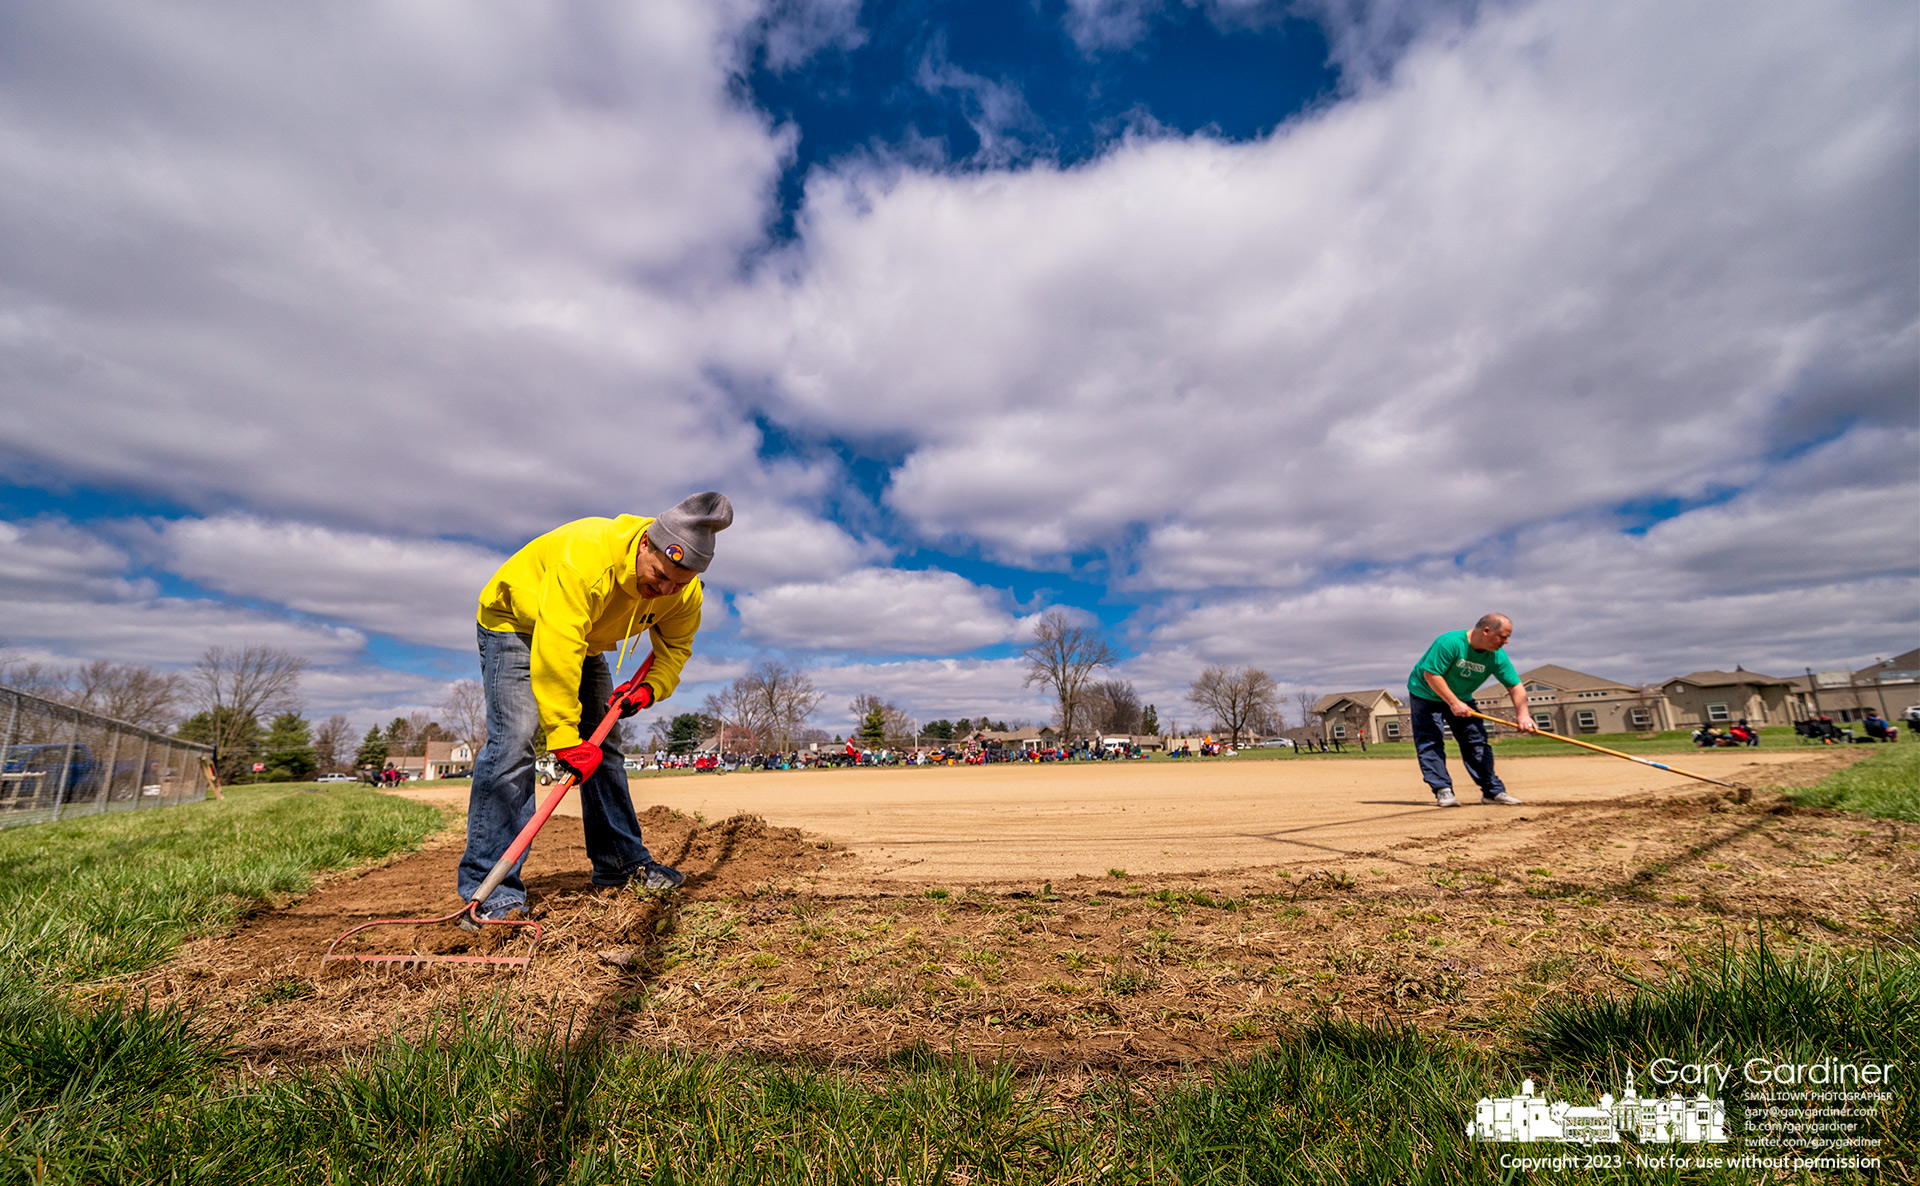 Volunteers clear weeds and overgrown grass from around the infield at the St. Paul baseball fields in preparation for the start of the season. My Final Photo for April 2, 2023.